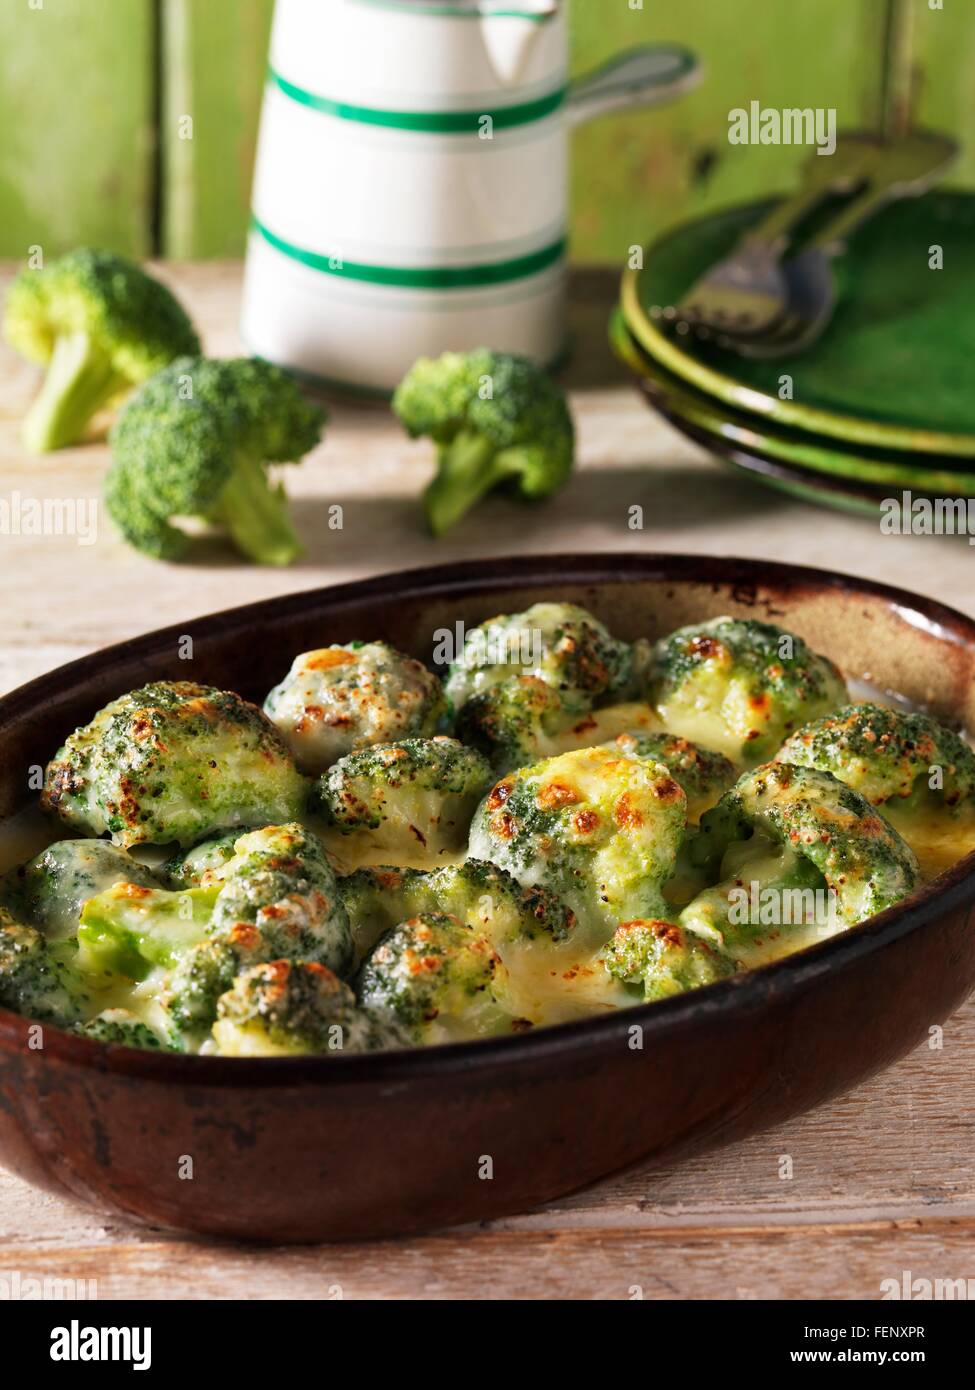 Casserole side dish with  broccoli gratin and cheese Stock Photo